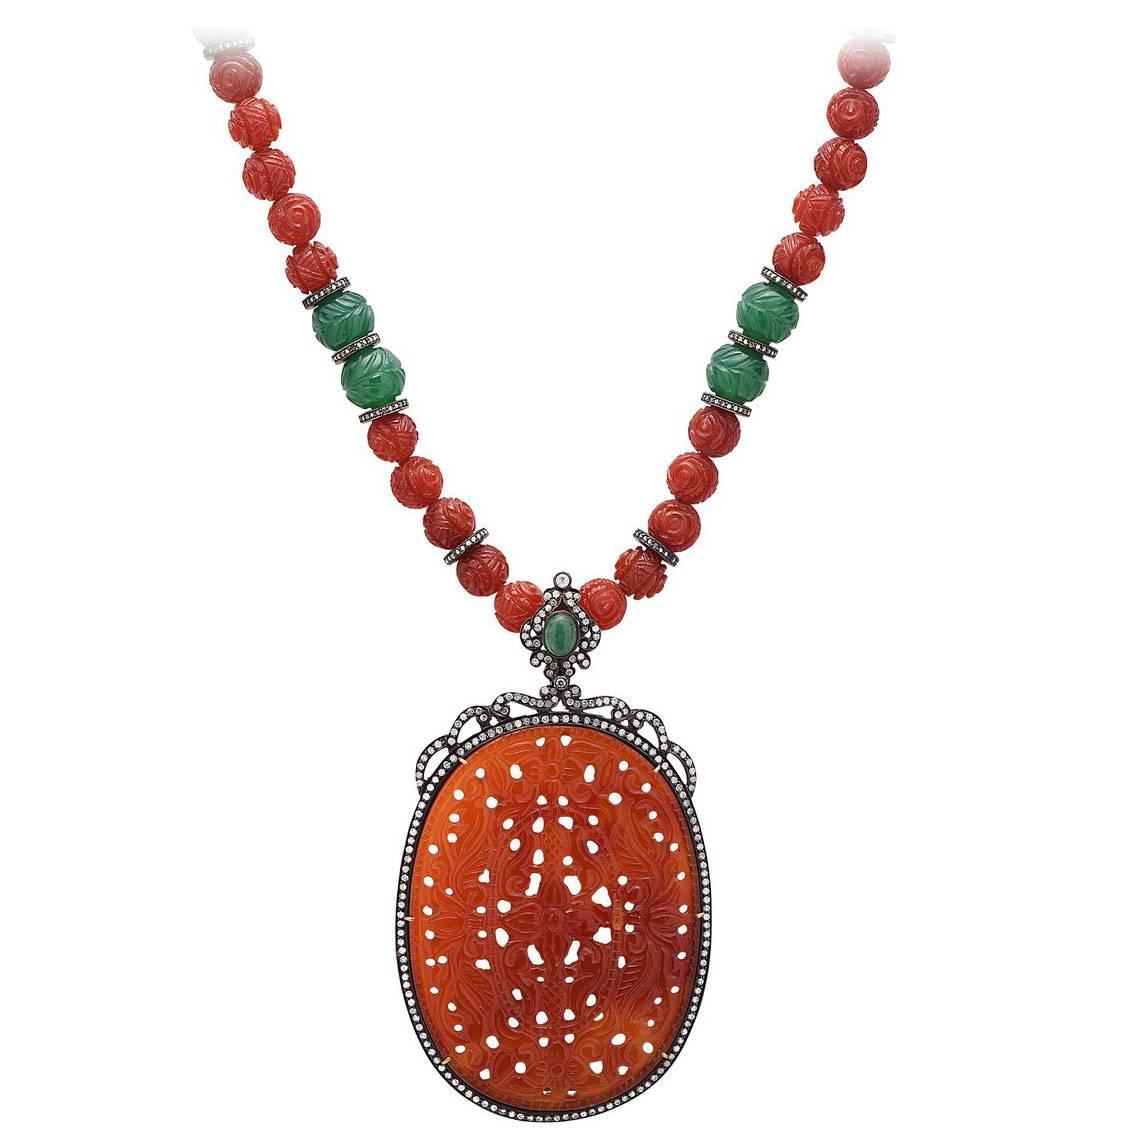 Carved Agate and Onyx Beaded Necklace with Diamonds In Silver